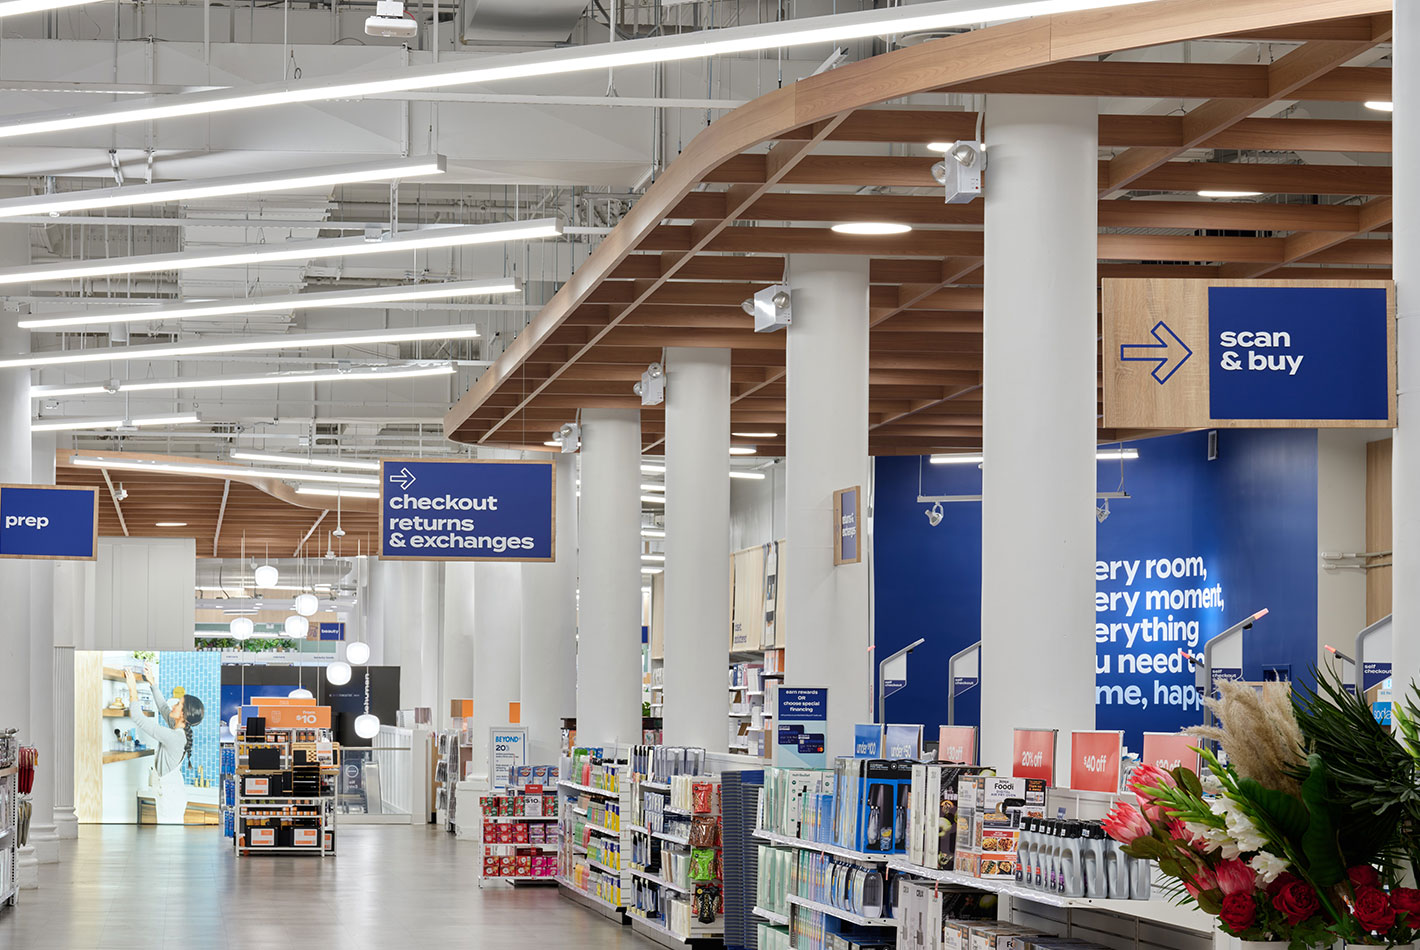 An interior view of the Bed Bath & Beyond flagship store